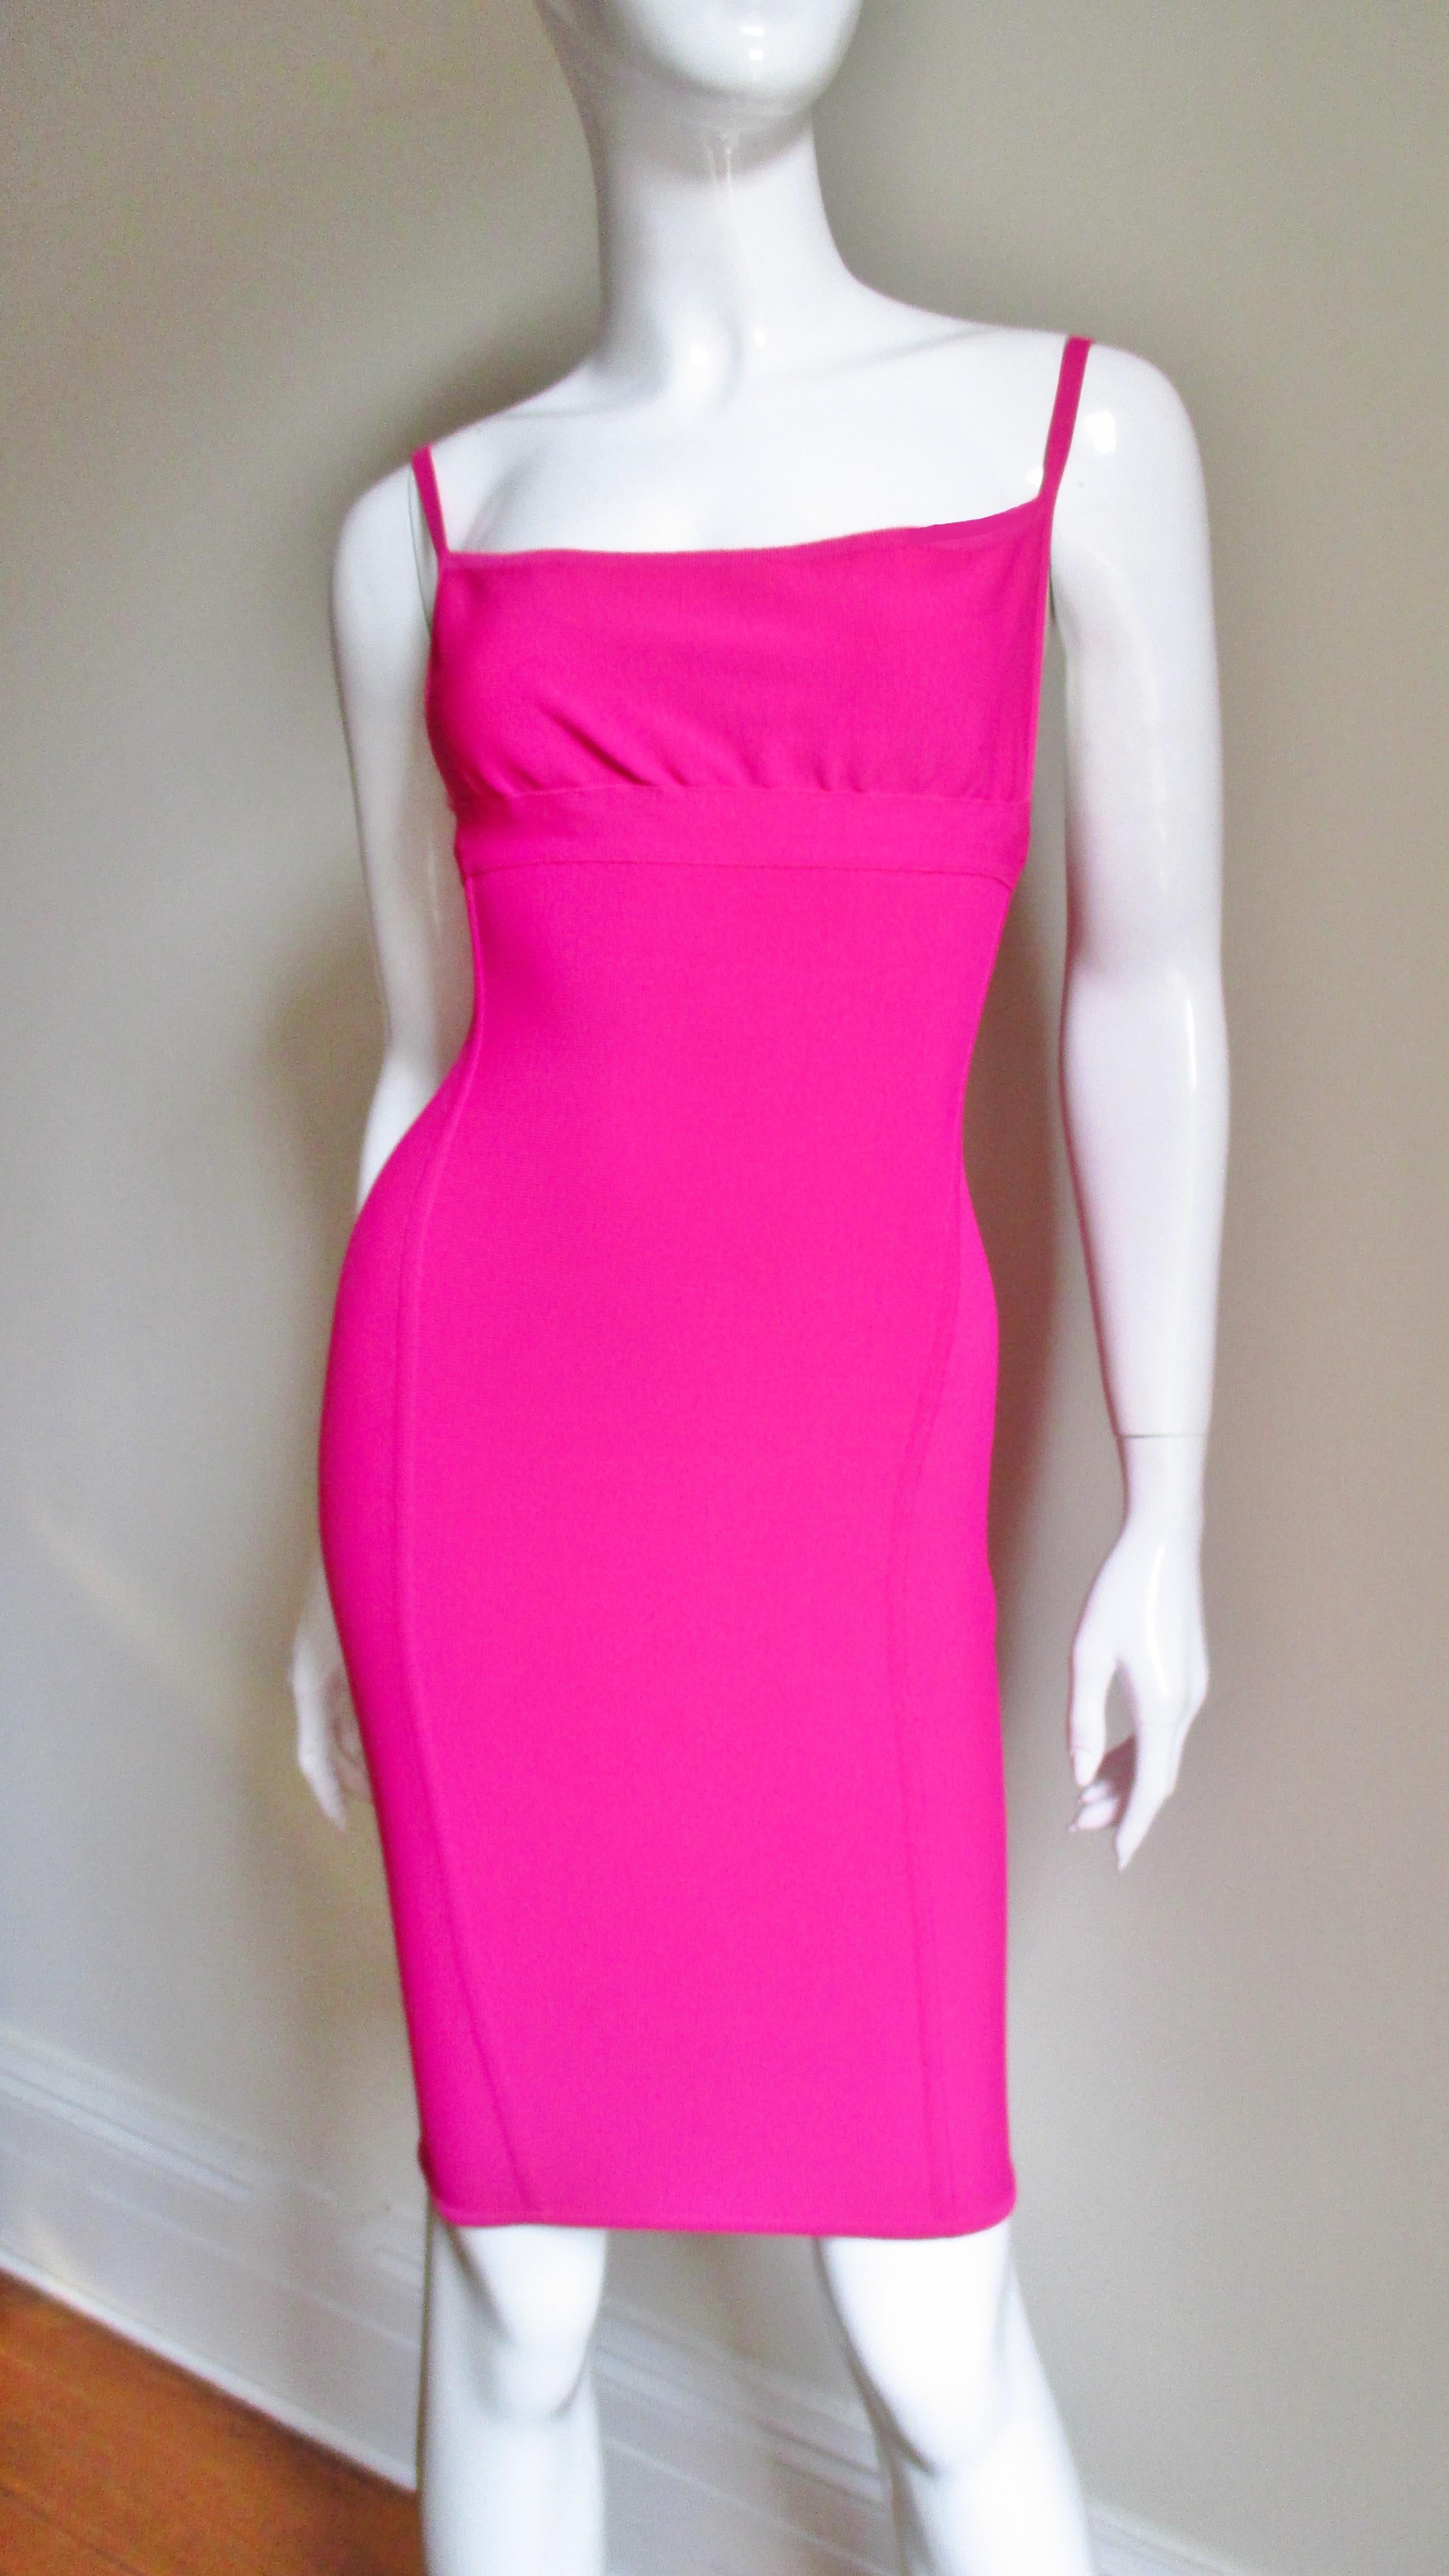 Herve Leger Pink Bodycon Dress 1990s In Excellent Condition For Sale In Water Mill, NY